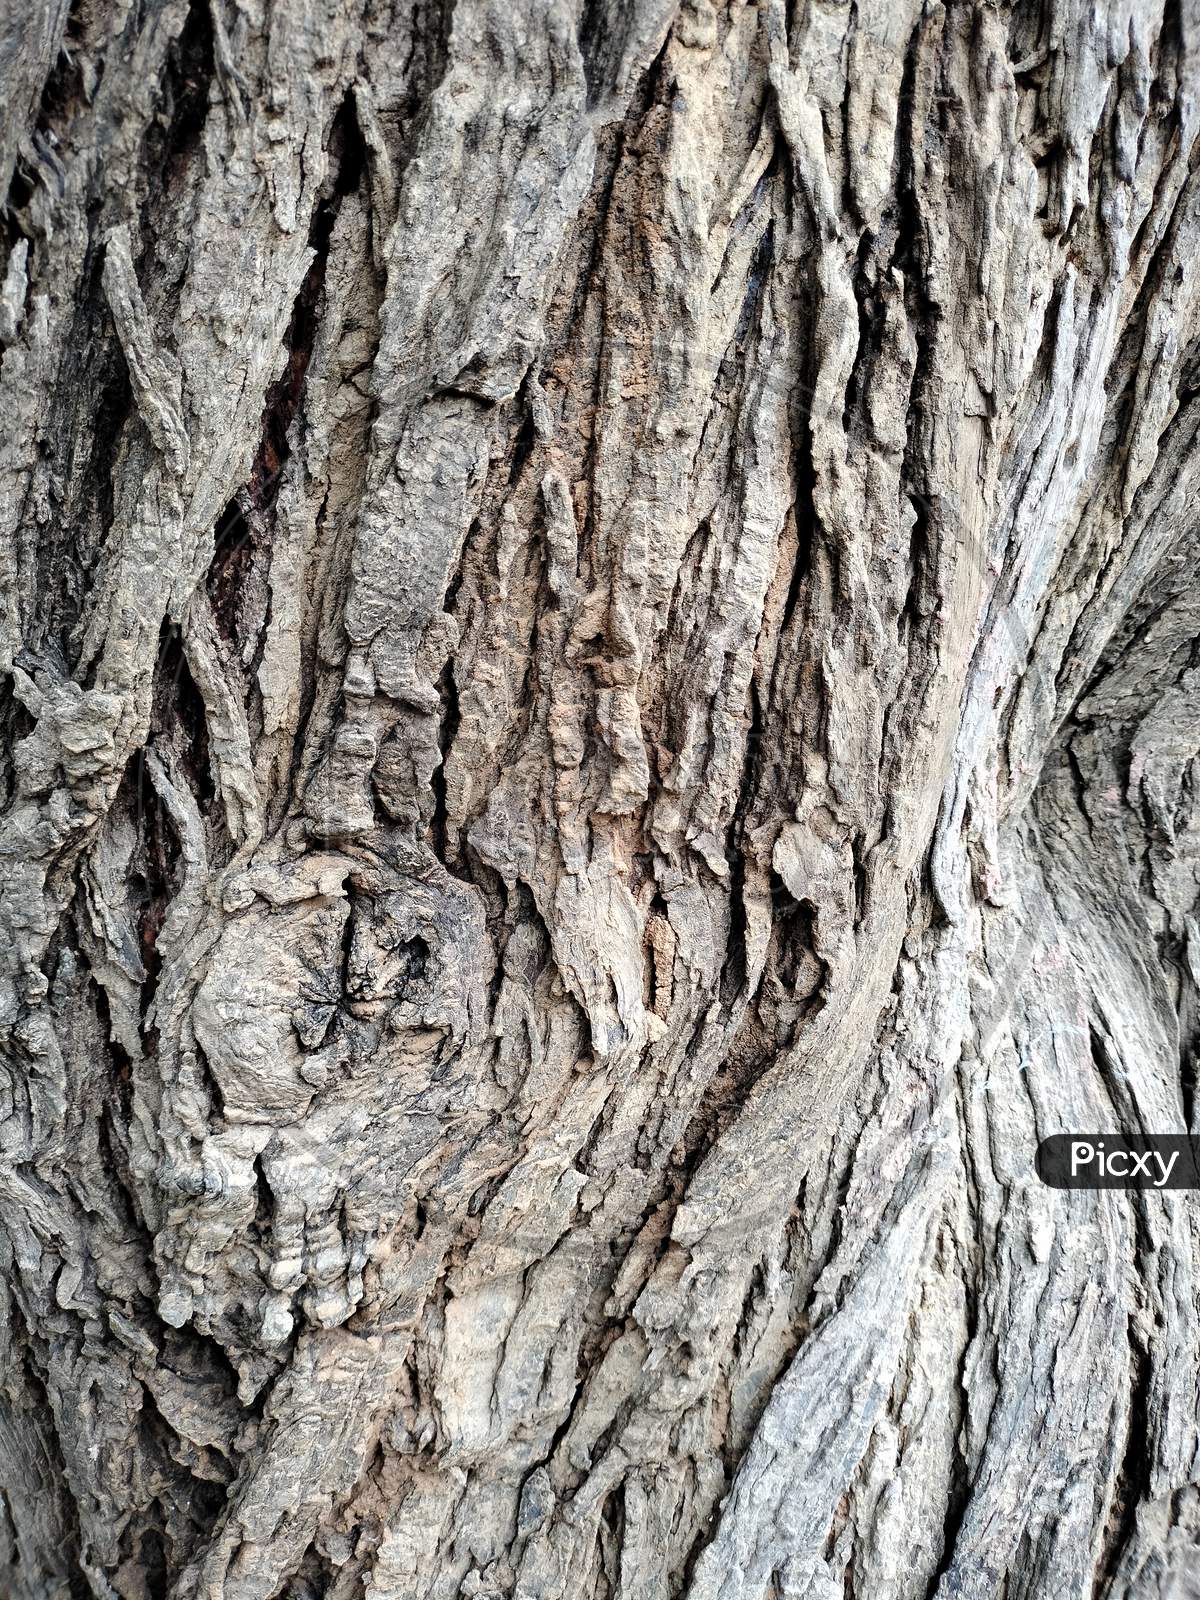 close up photograph of eged a tree trunk